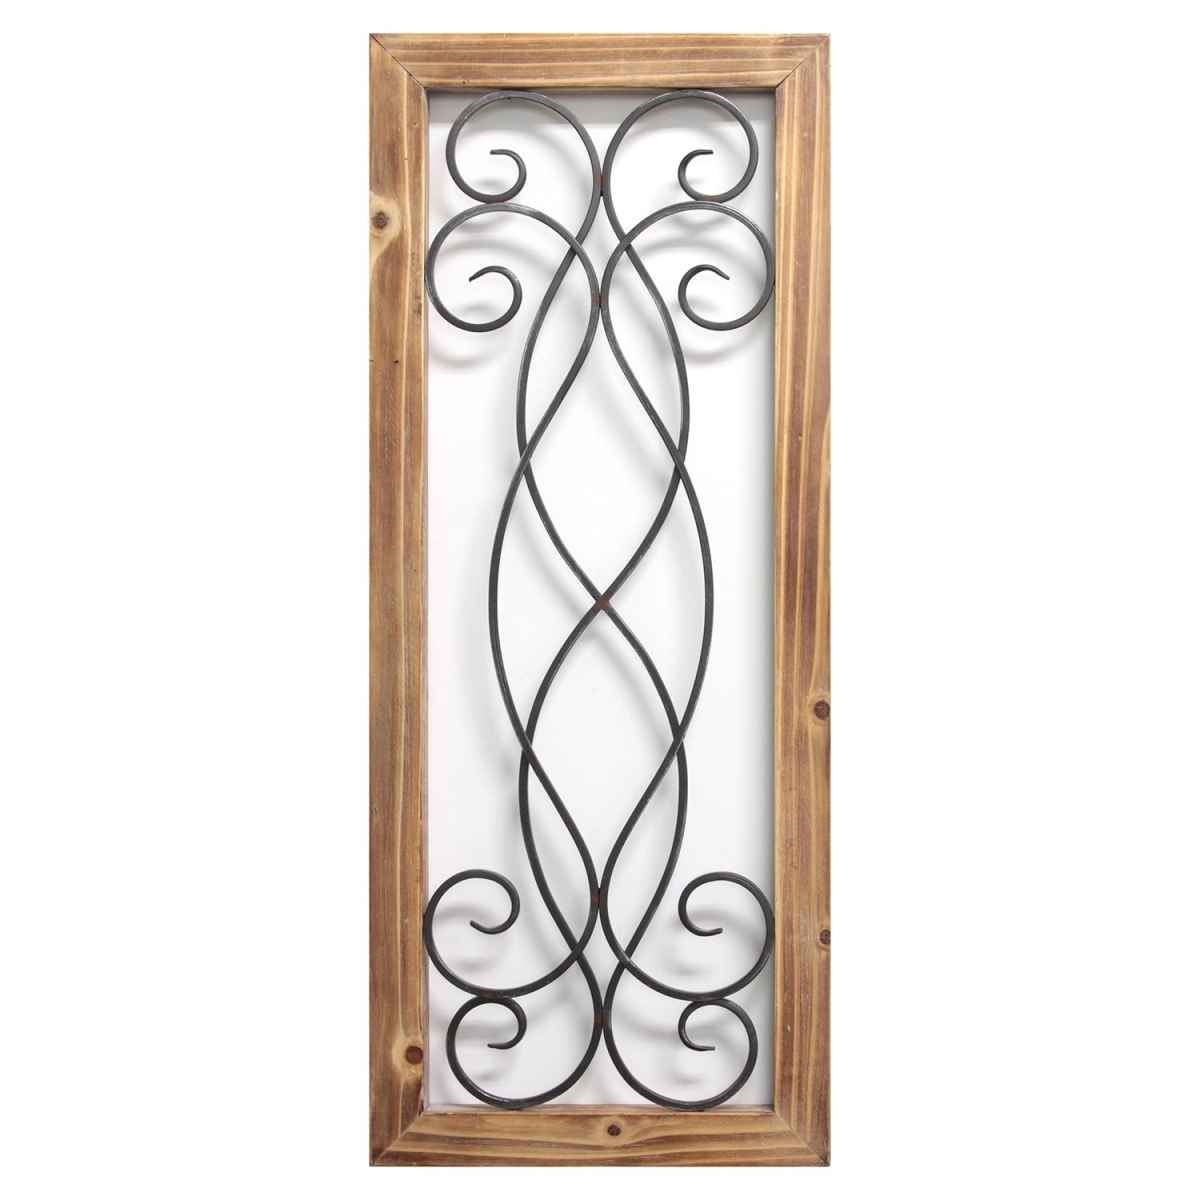 Home Roots 321247 Scroll Panel Wall Decor, Natural Wood & Pewter